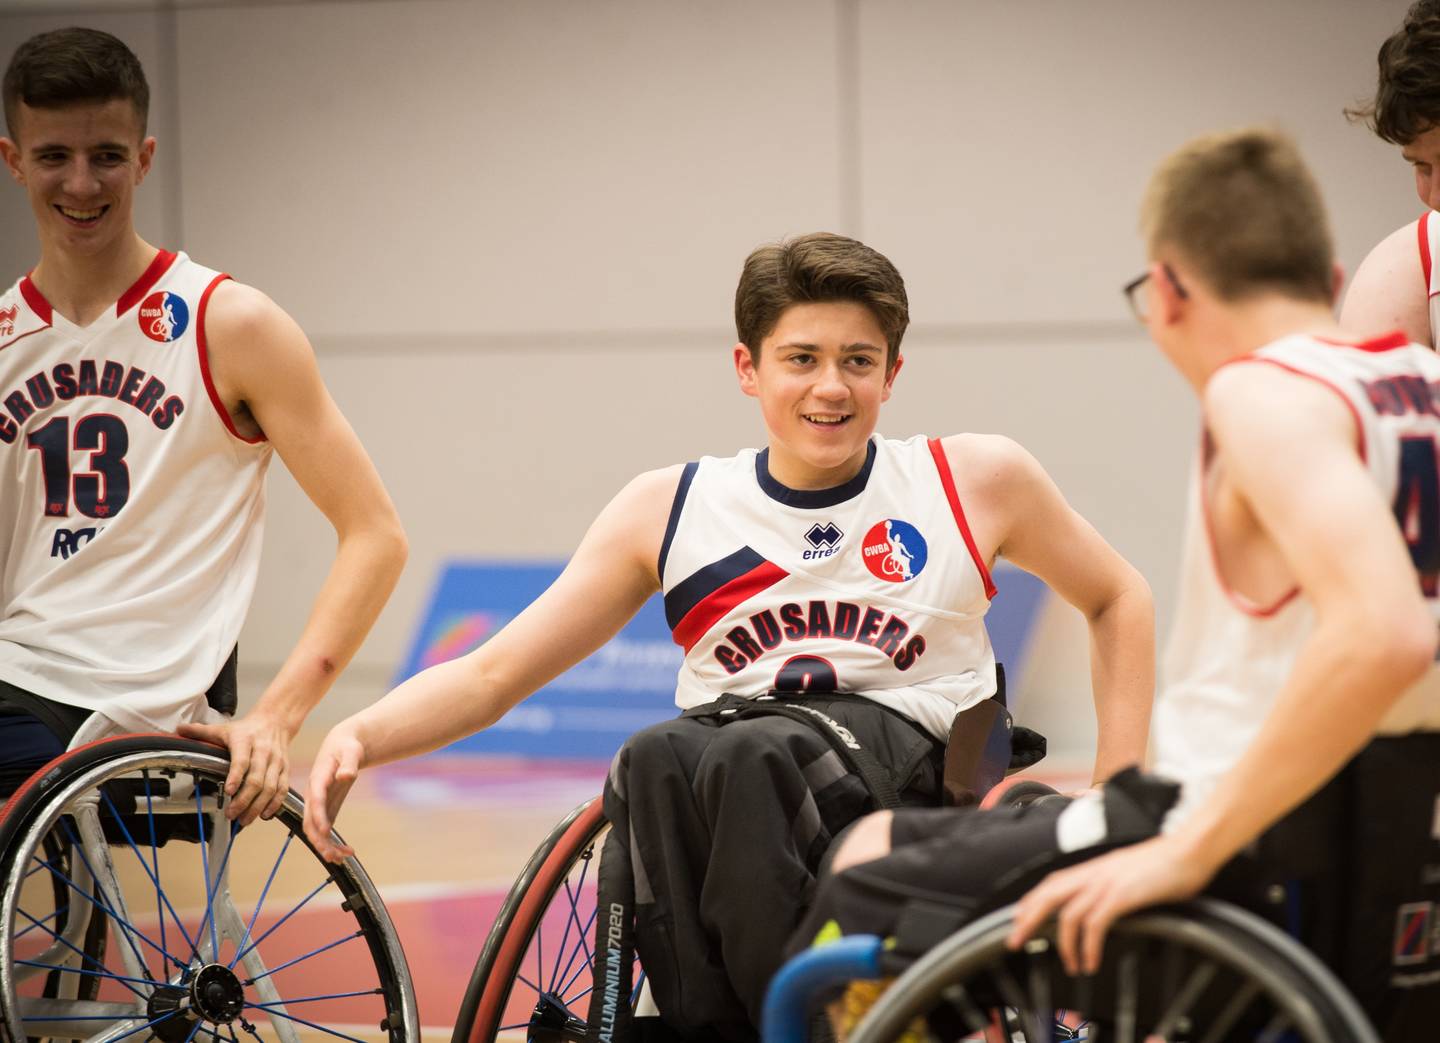 Players taking part in Lord's Taverners wheelchair basketball junior league match